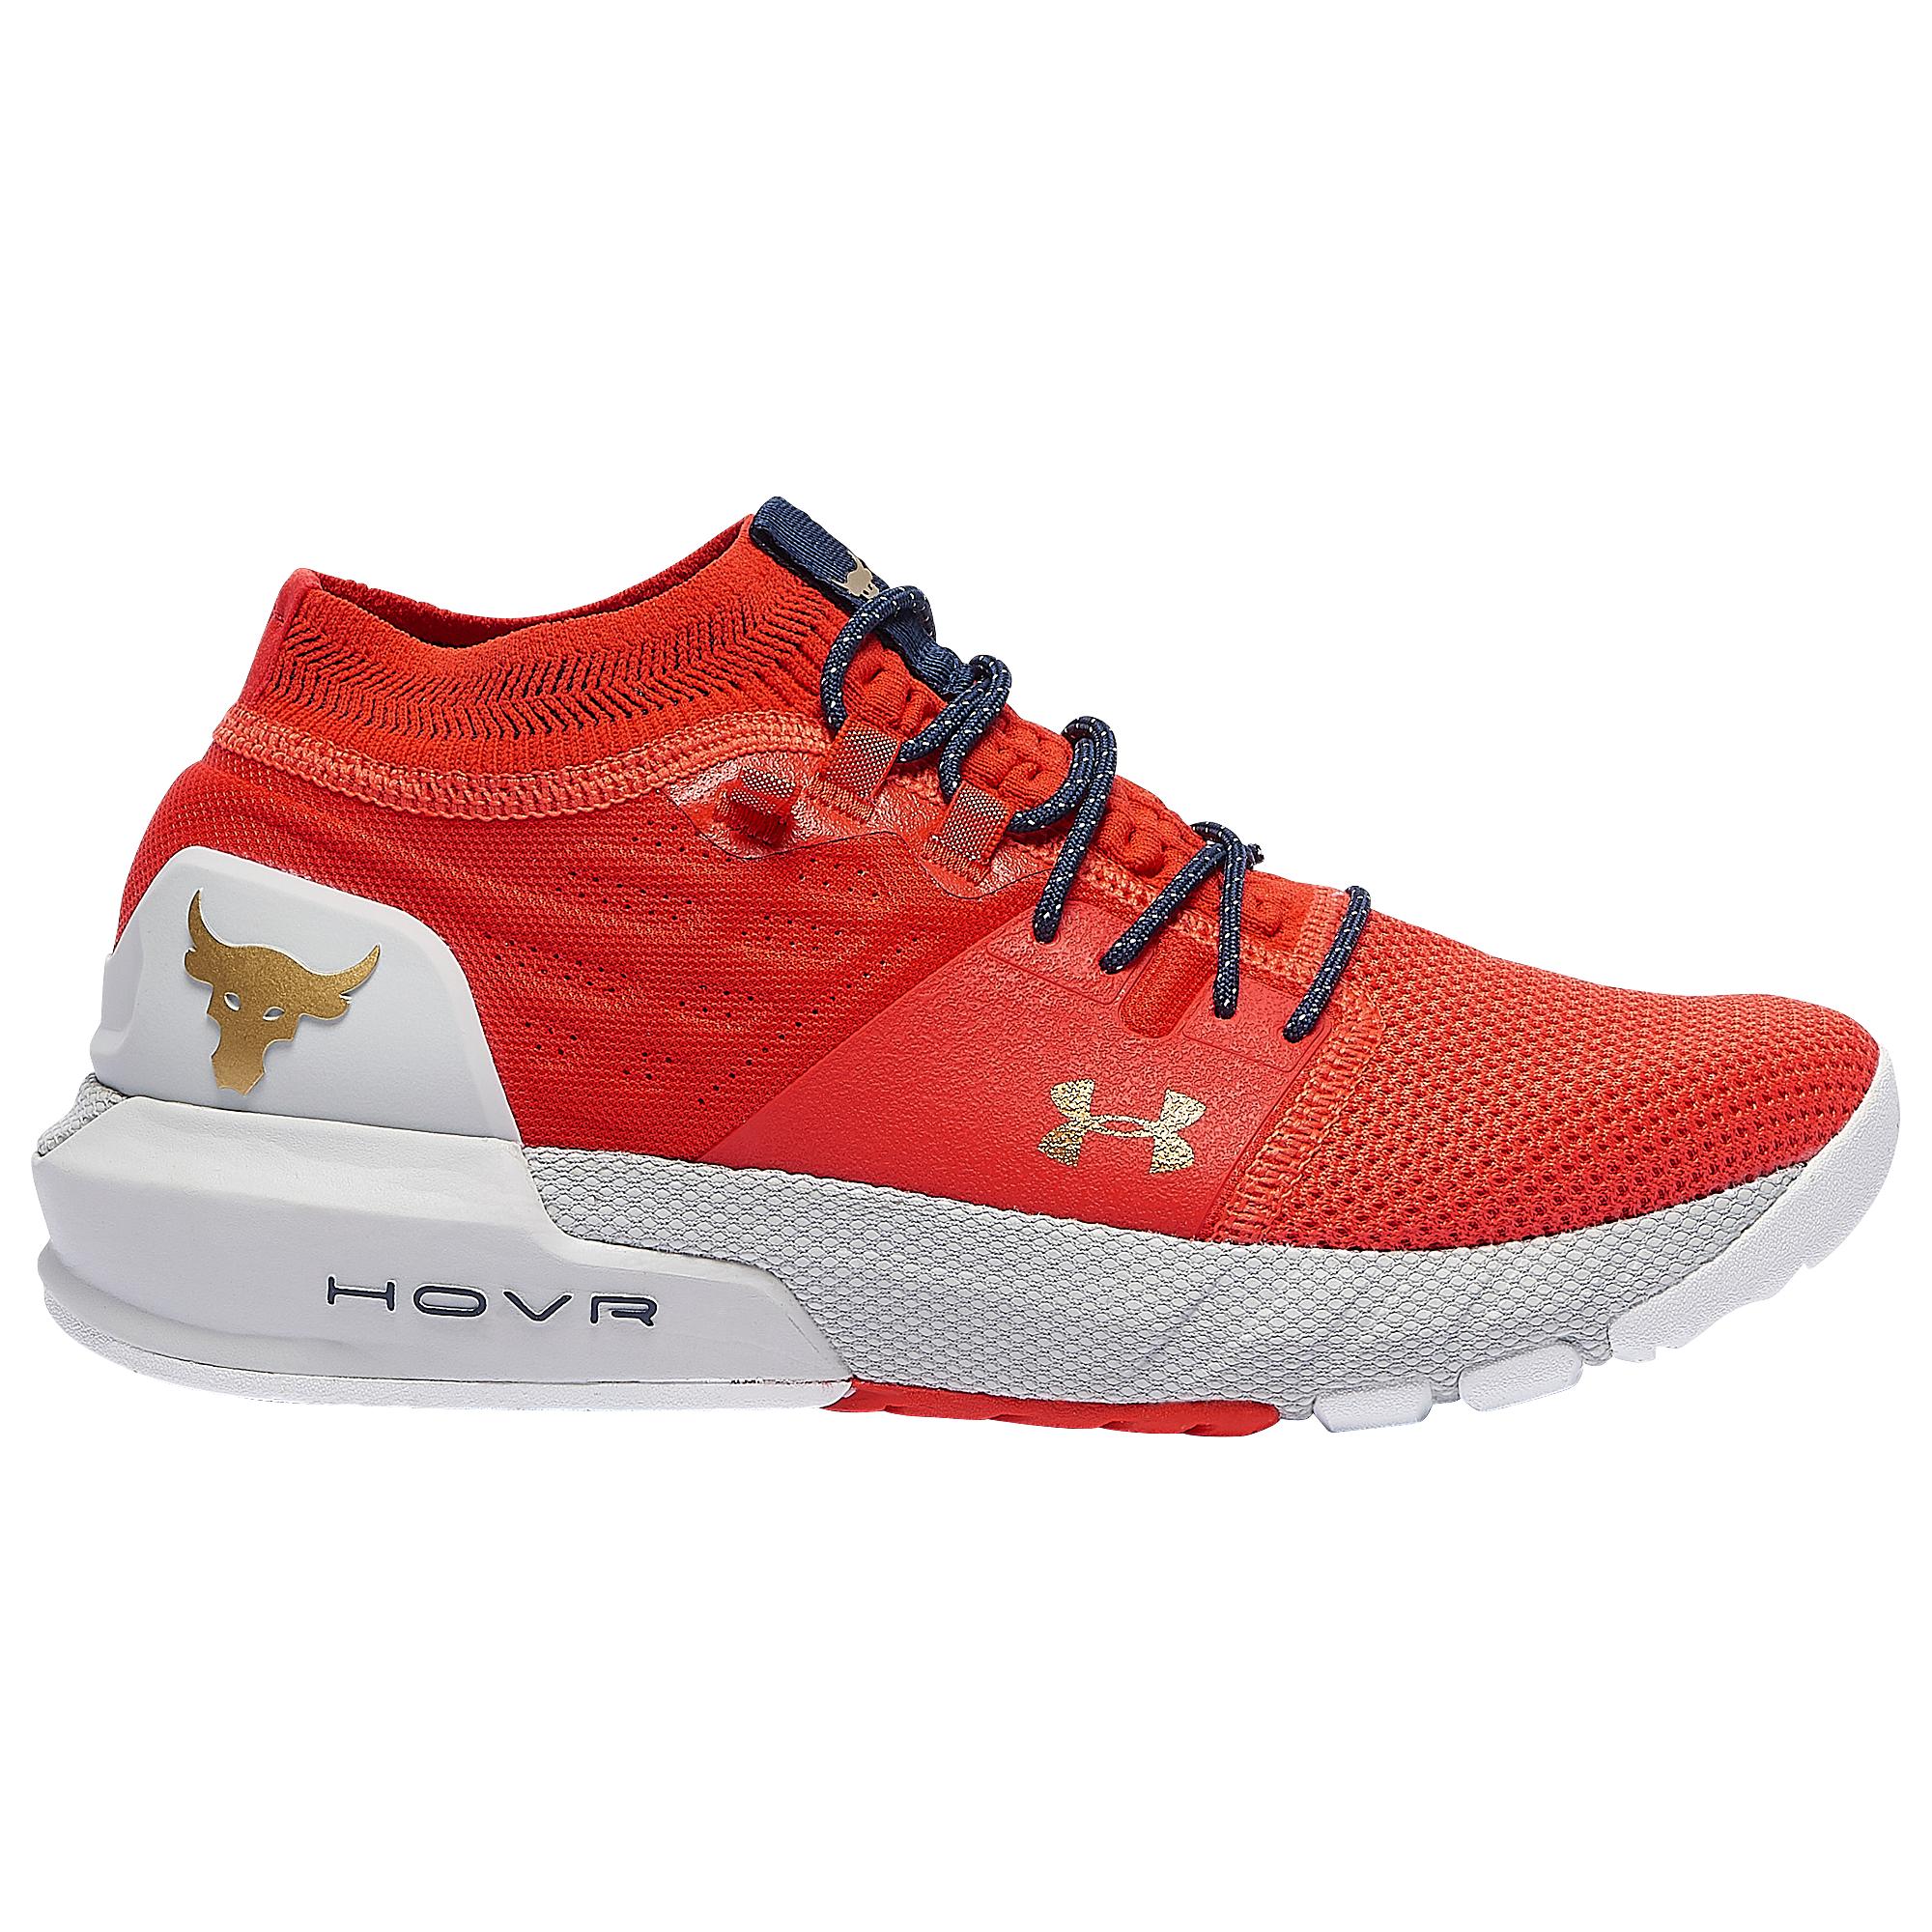 Under Armour Project Rock 2 Training Shoes in Red - Lyst